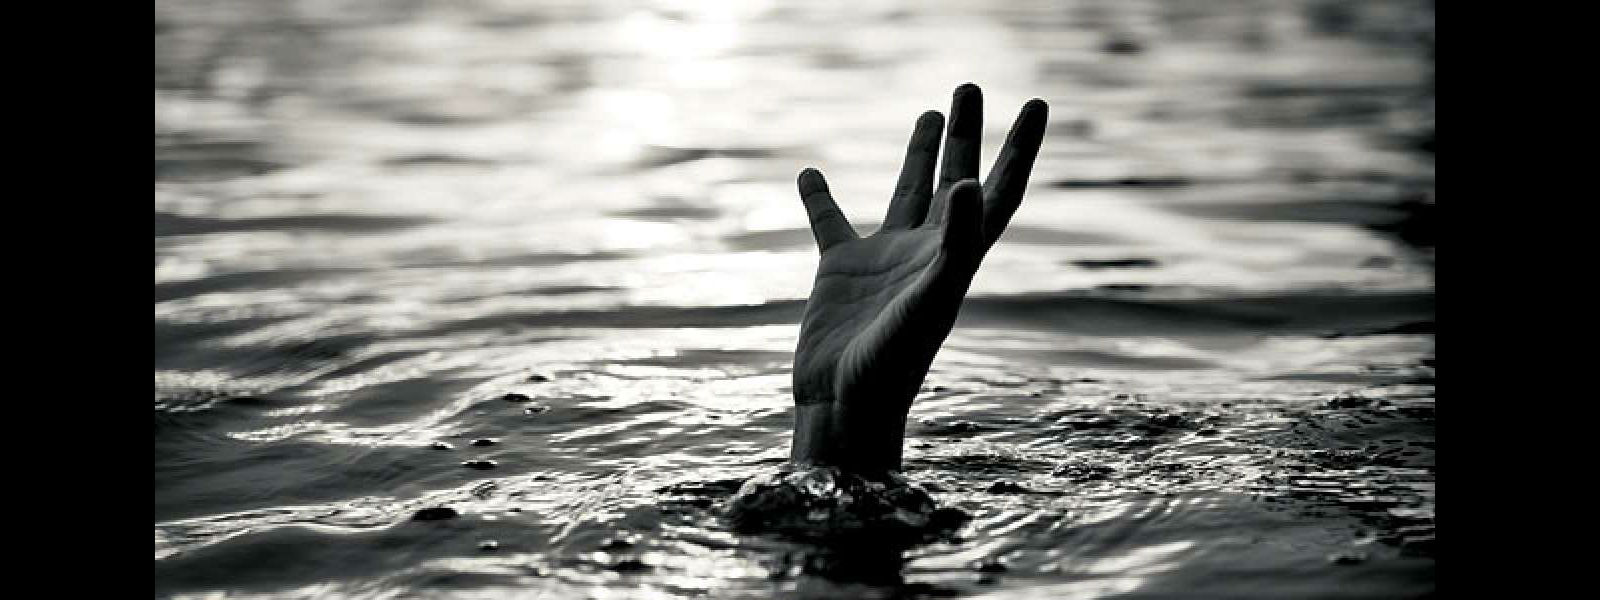 Youth dies due to drowning in Mahaweli River